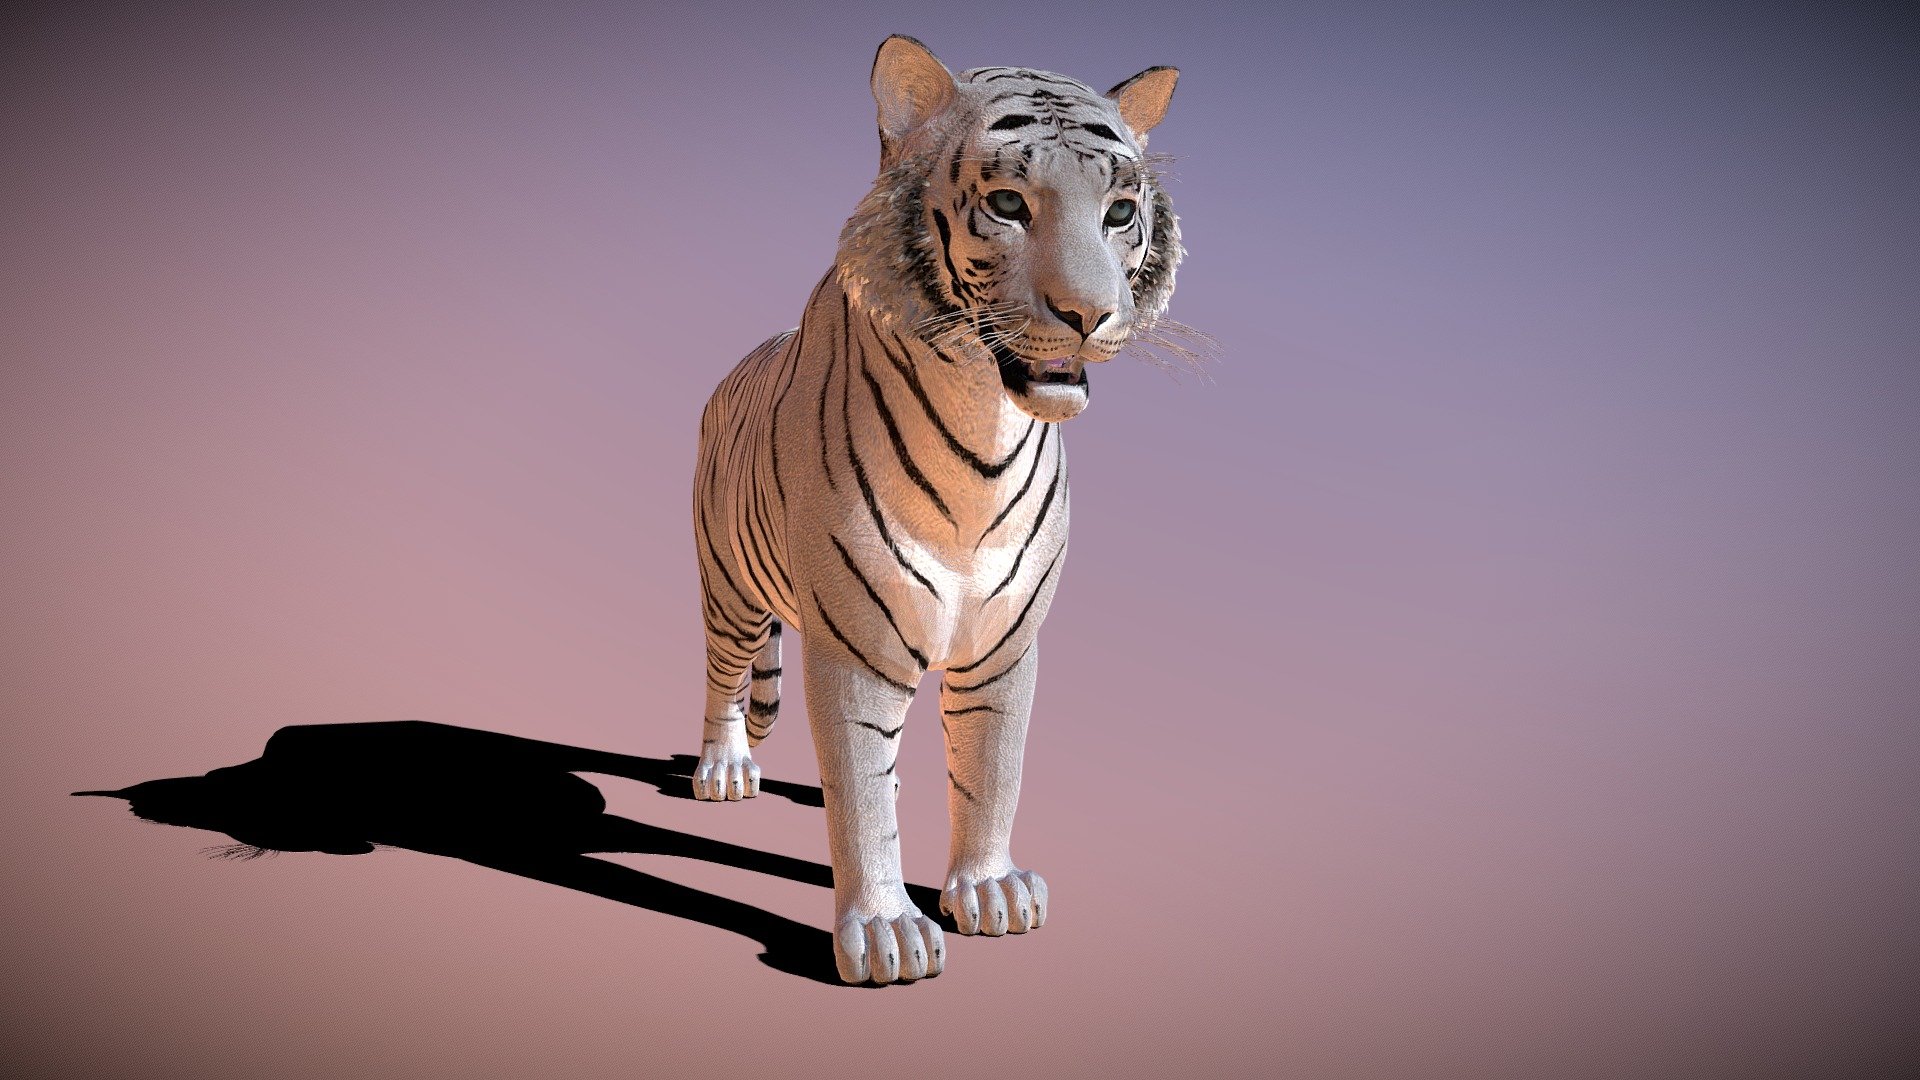 This white tiger animated rigged model is perfect for any 3D animation project. Created using Blender, this model features a realistic tiger with a detailed fur texture and a fully rigged skeleton. The model is ready to be used in any 3D animation software and can be easily manipulated to create unique movements and poses. With its realistic look and feel, this white tiger model will bring life to any 3D animation project.

this is the original: https://sketchfab.com/3d-models/tiger-51ed5186afb04487ae6adb51f8ffd09b - White Tiger (RIGGED ANIMATED) - Download Free 3D model by CGJAY1111 3d model